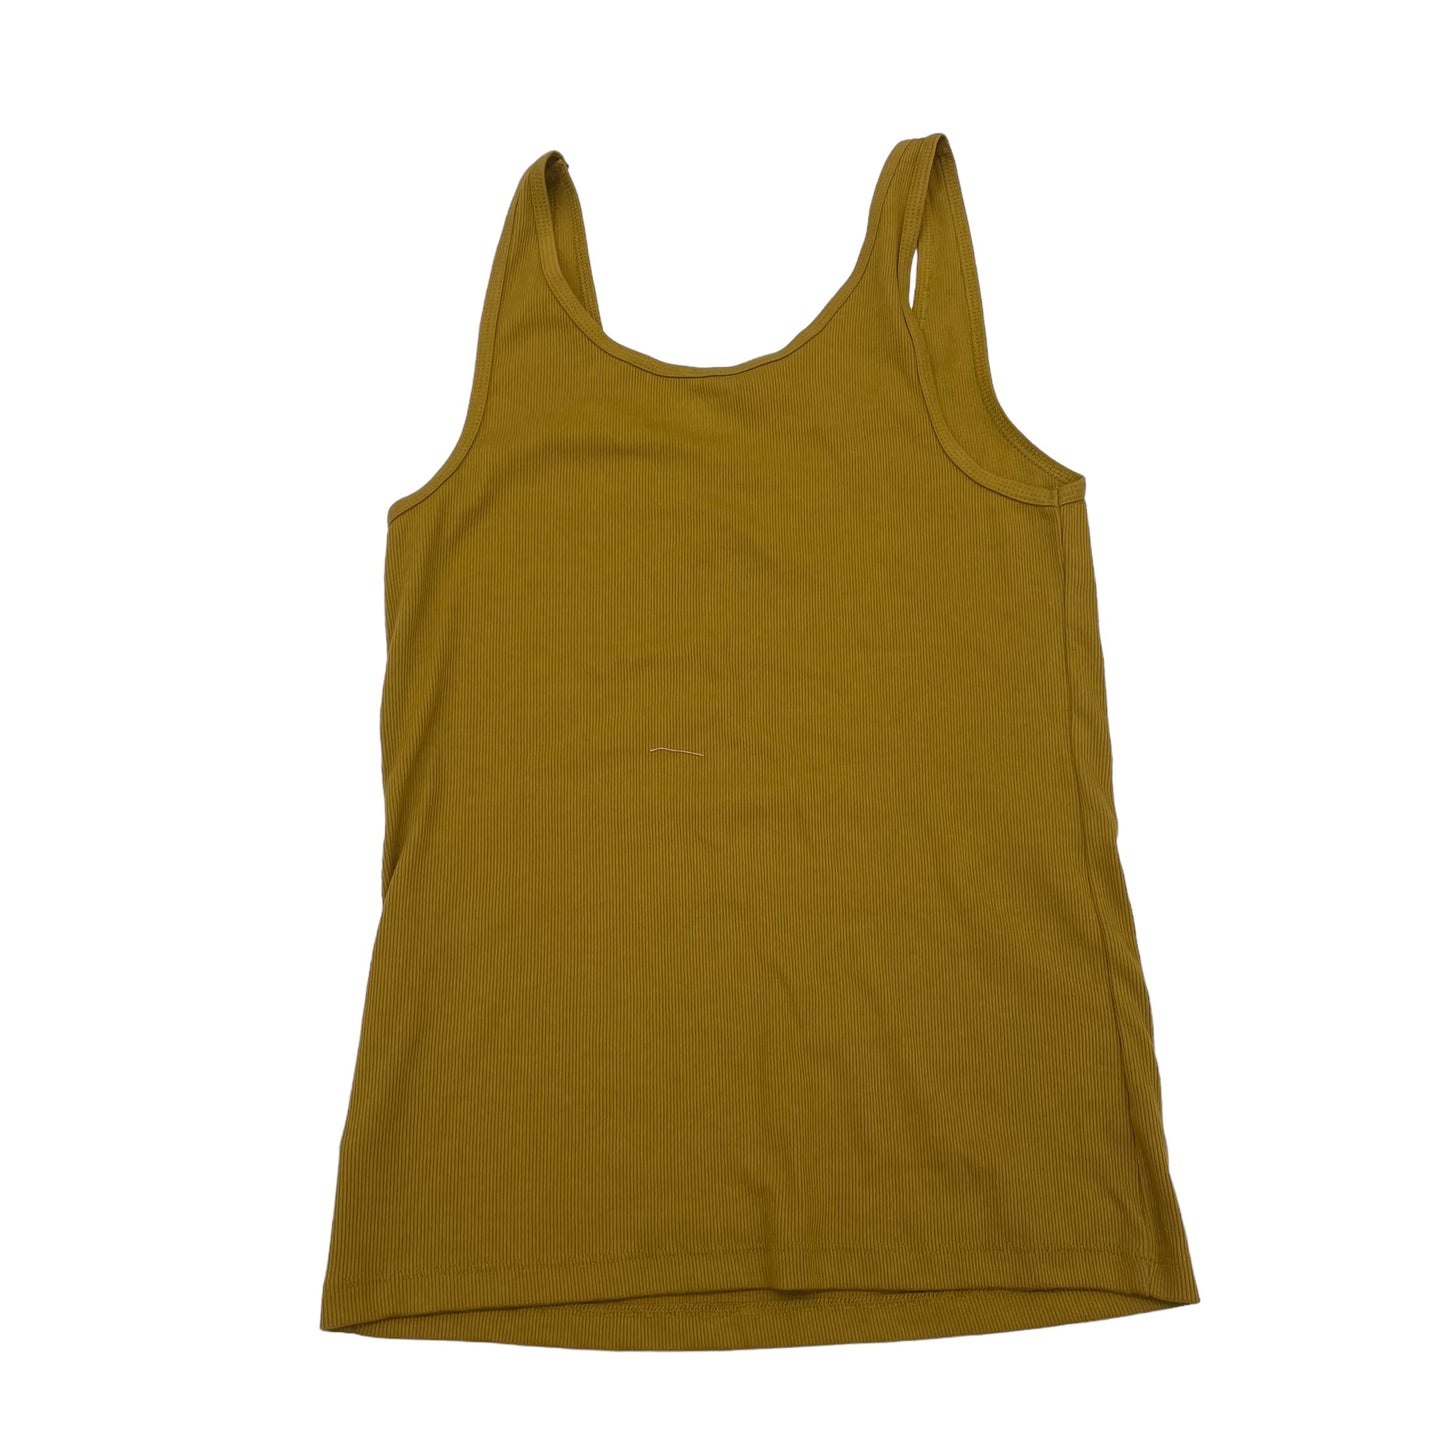 YELLOW OLD NAVY TANK TOP, Size L